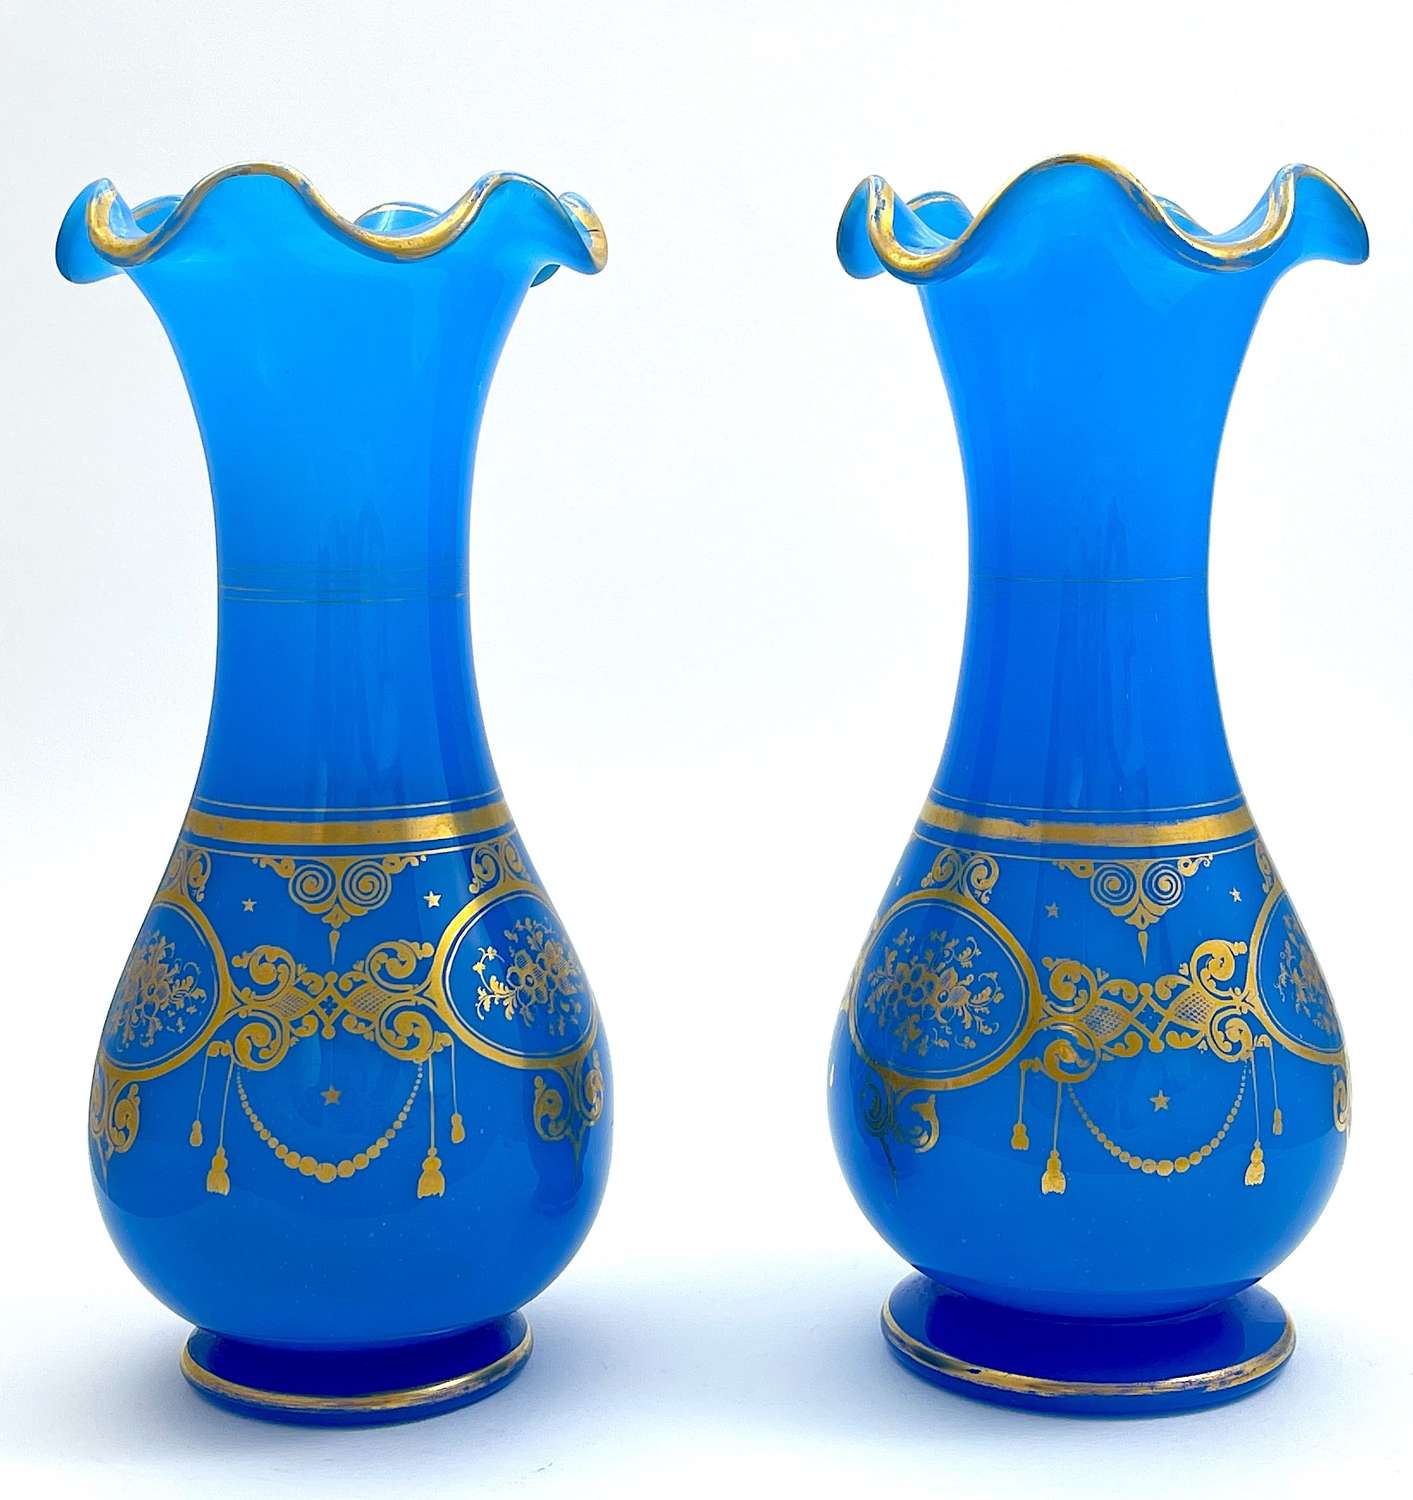 A Pair of High Quality Baccarat Blue Opaline Glass Vases